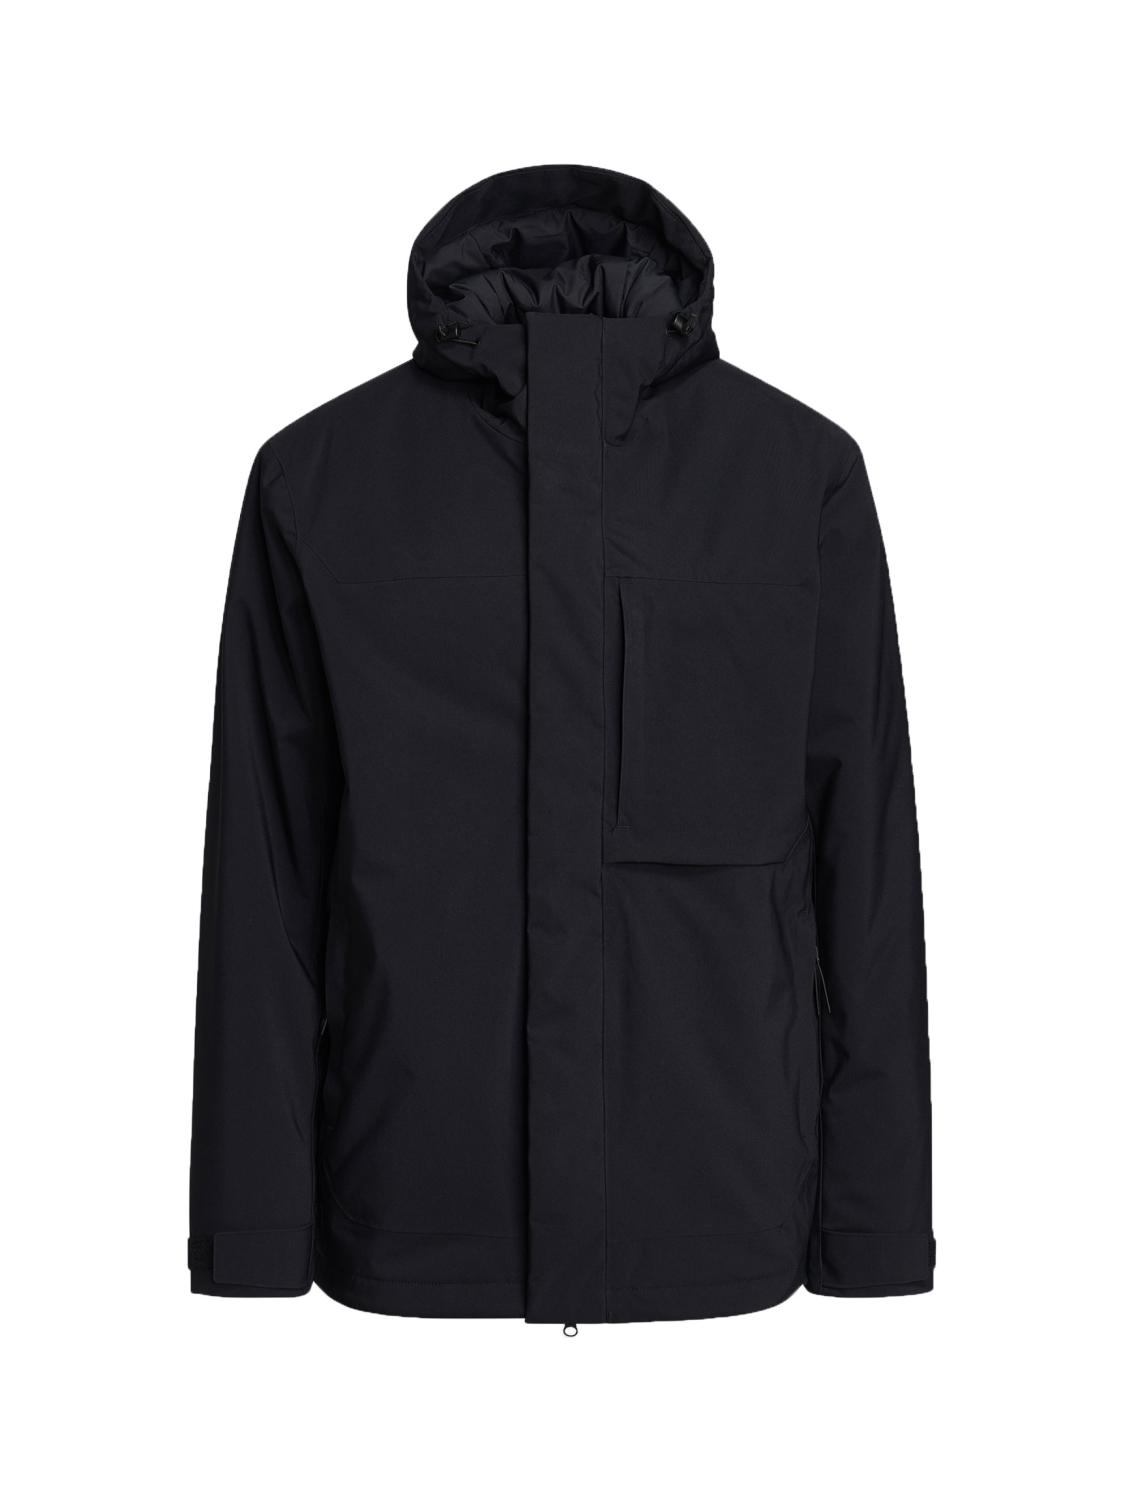 M Unified Insulated Jacke - black